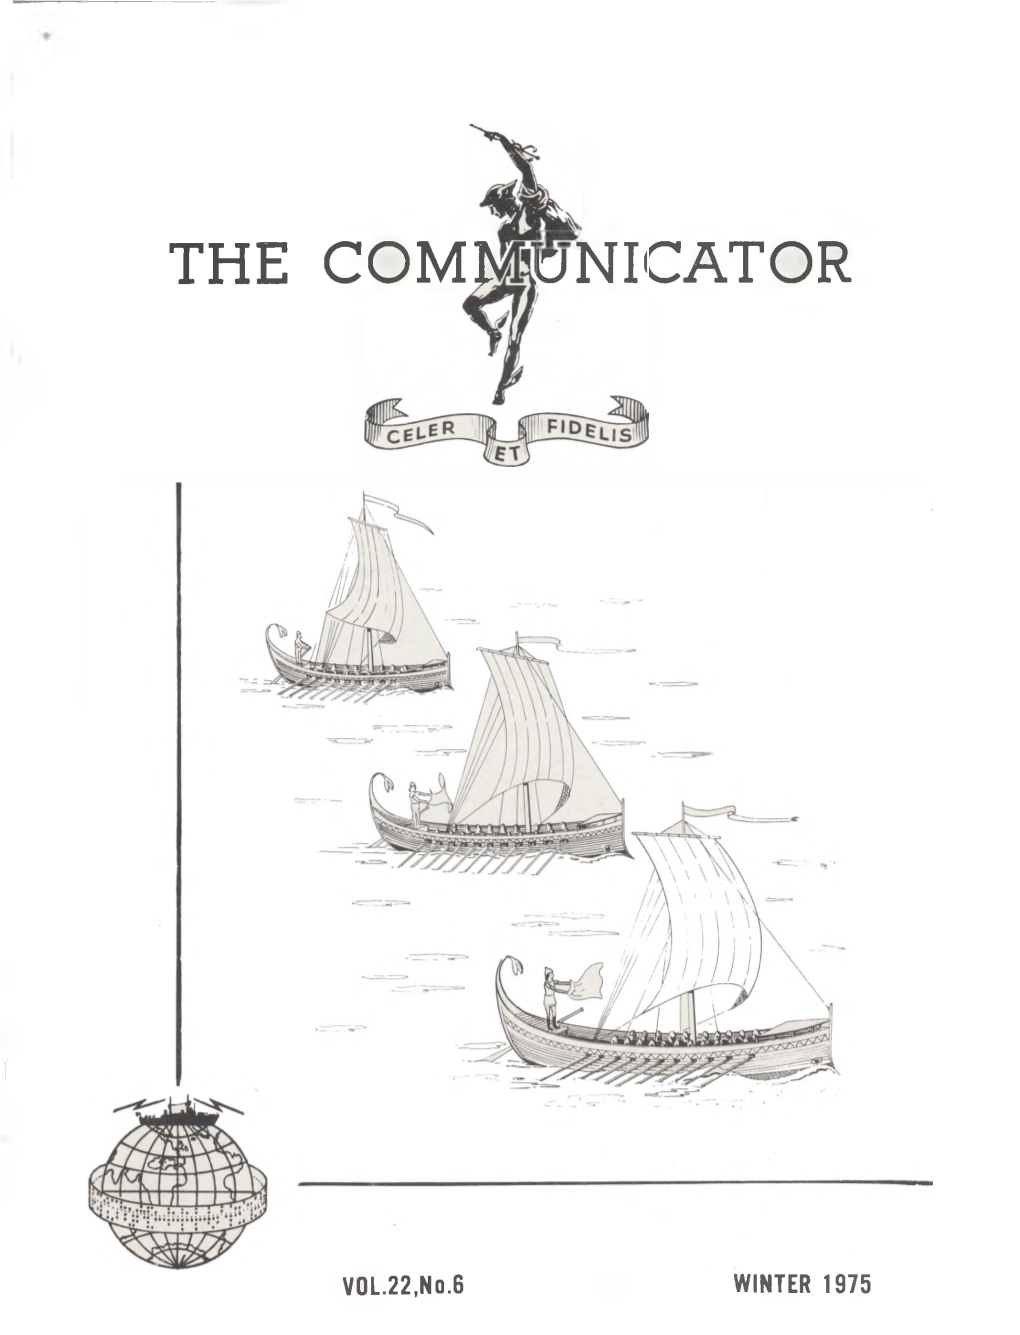 THE COMMUNICATOR PUBLISHED at HMS “MERCURY' the Magazine of the Communications Branch, Royal Navy and the Royal Naval Amateur Radio Society WINTER 1975 VOL